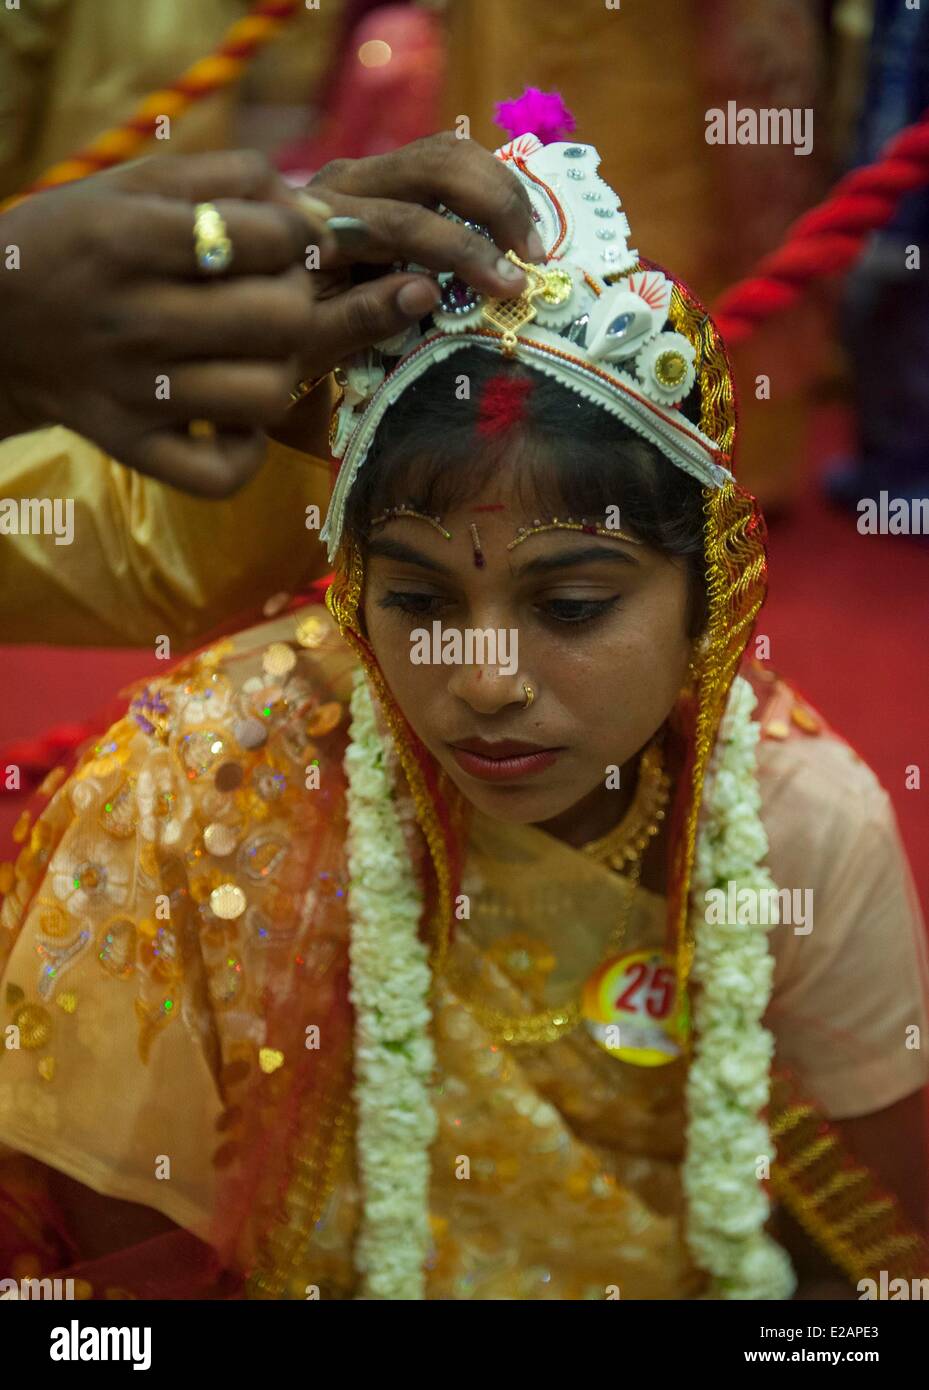 Calcutta, India. 18th June, 2014. An Indian bride attends a mass wedding in Calcutta, capital of eastern Indian state West Bengal, India, June 18, 2014. Mass weddings in India are often held by social organizations with the aim to help the couples who cannot afford the high wedding costs as well as the expensive dowry and gifts. Credit:  Tumpa Mondal/Xinhua/Alamy Live News Stock Photo